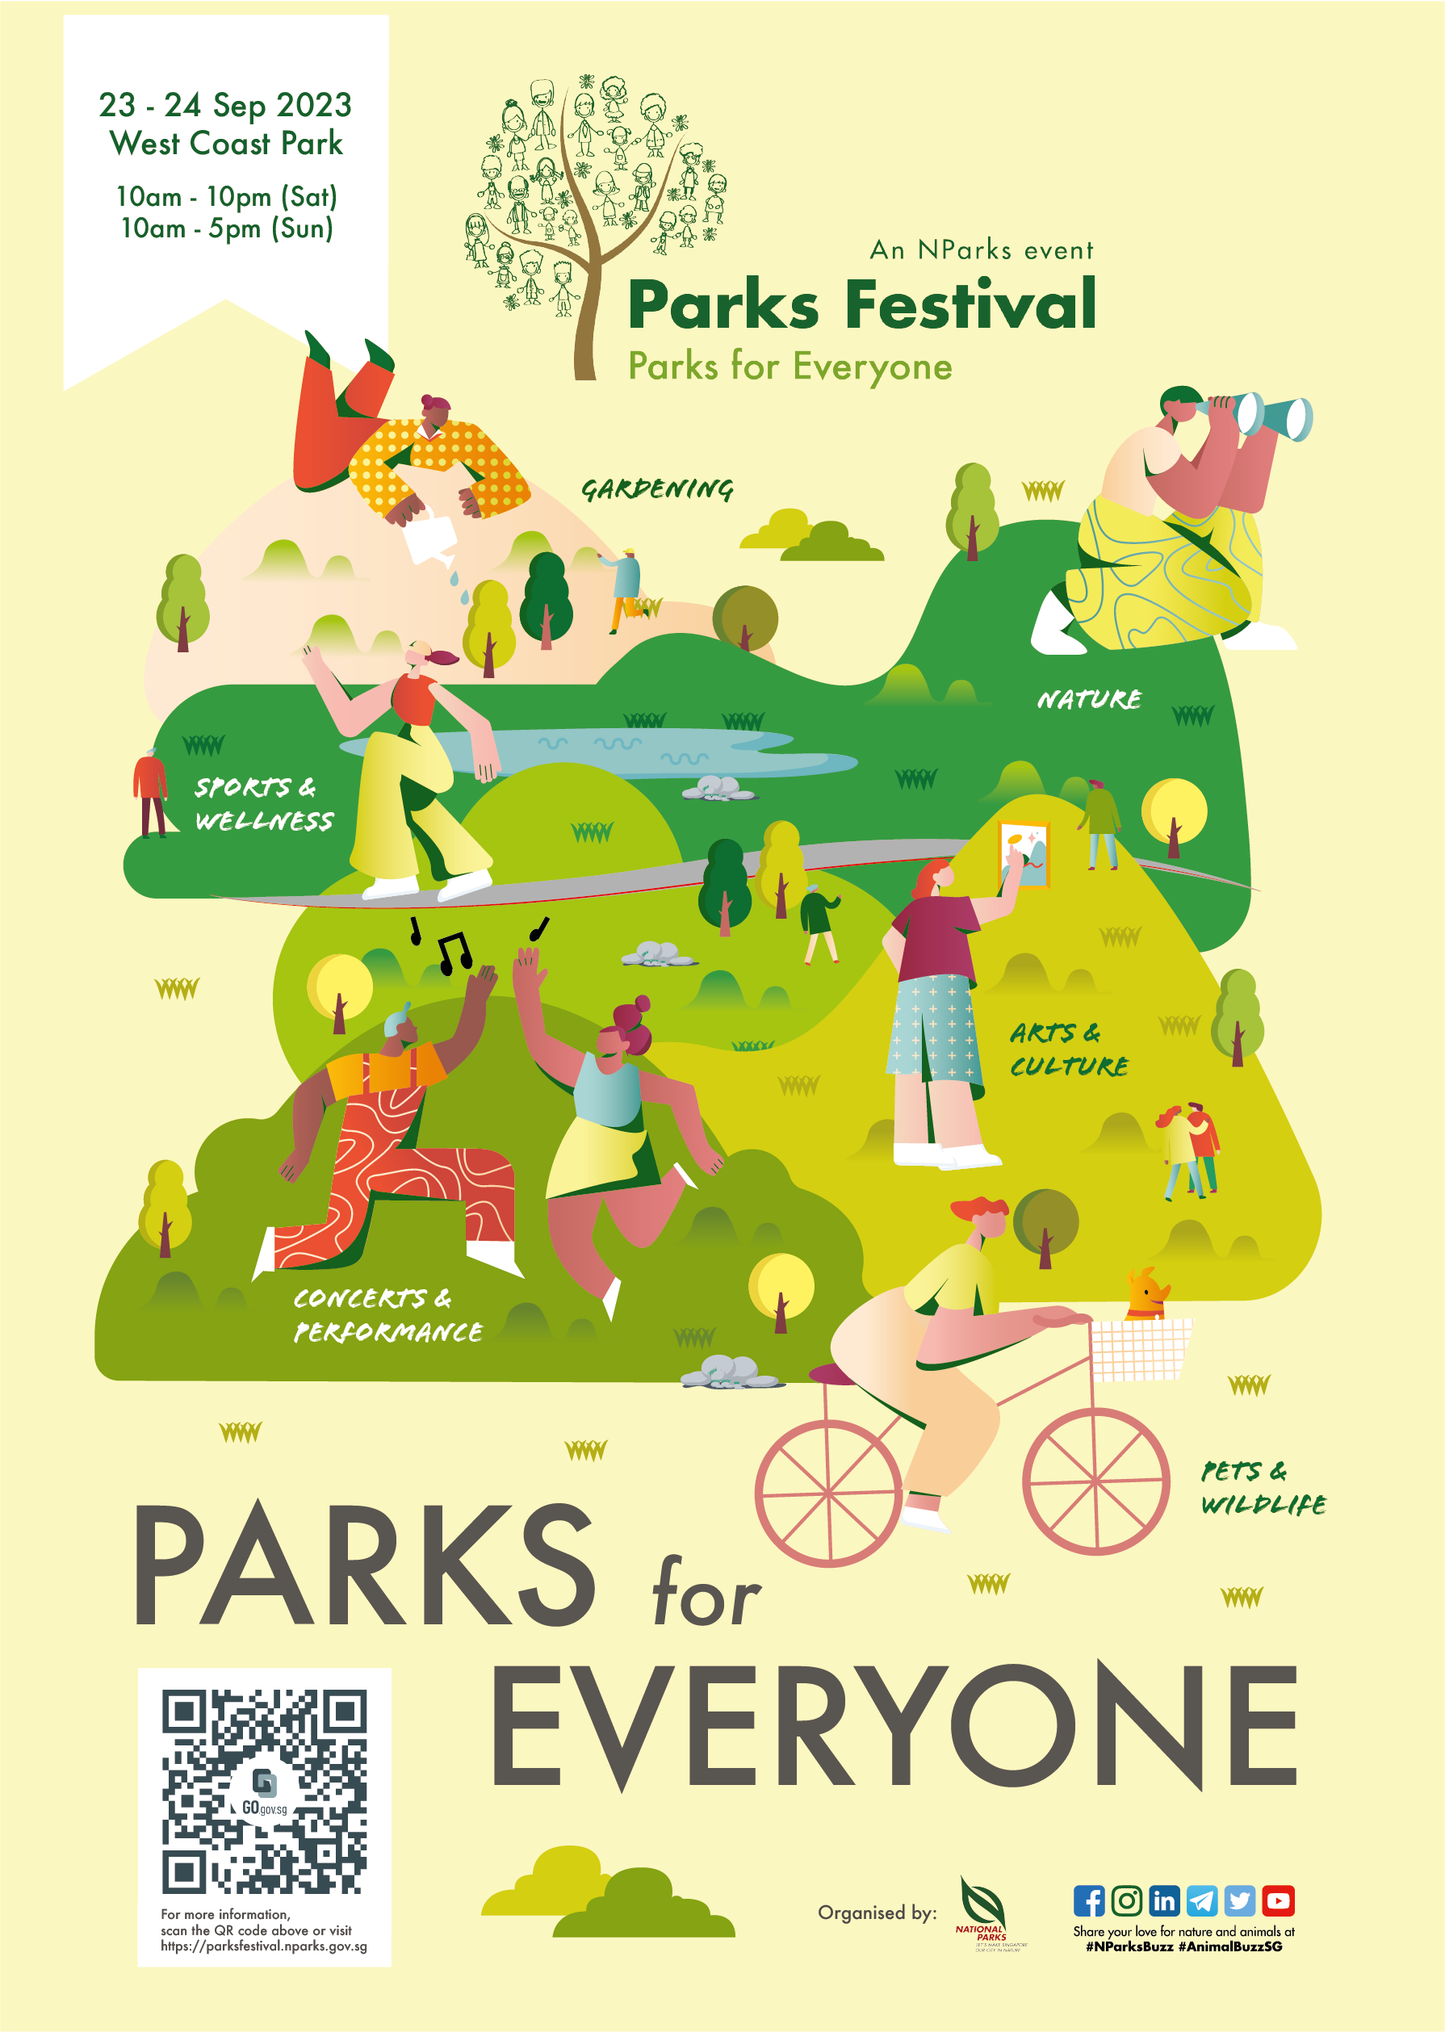 Activities at NParks Parks Festival 2023 @ West Coast